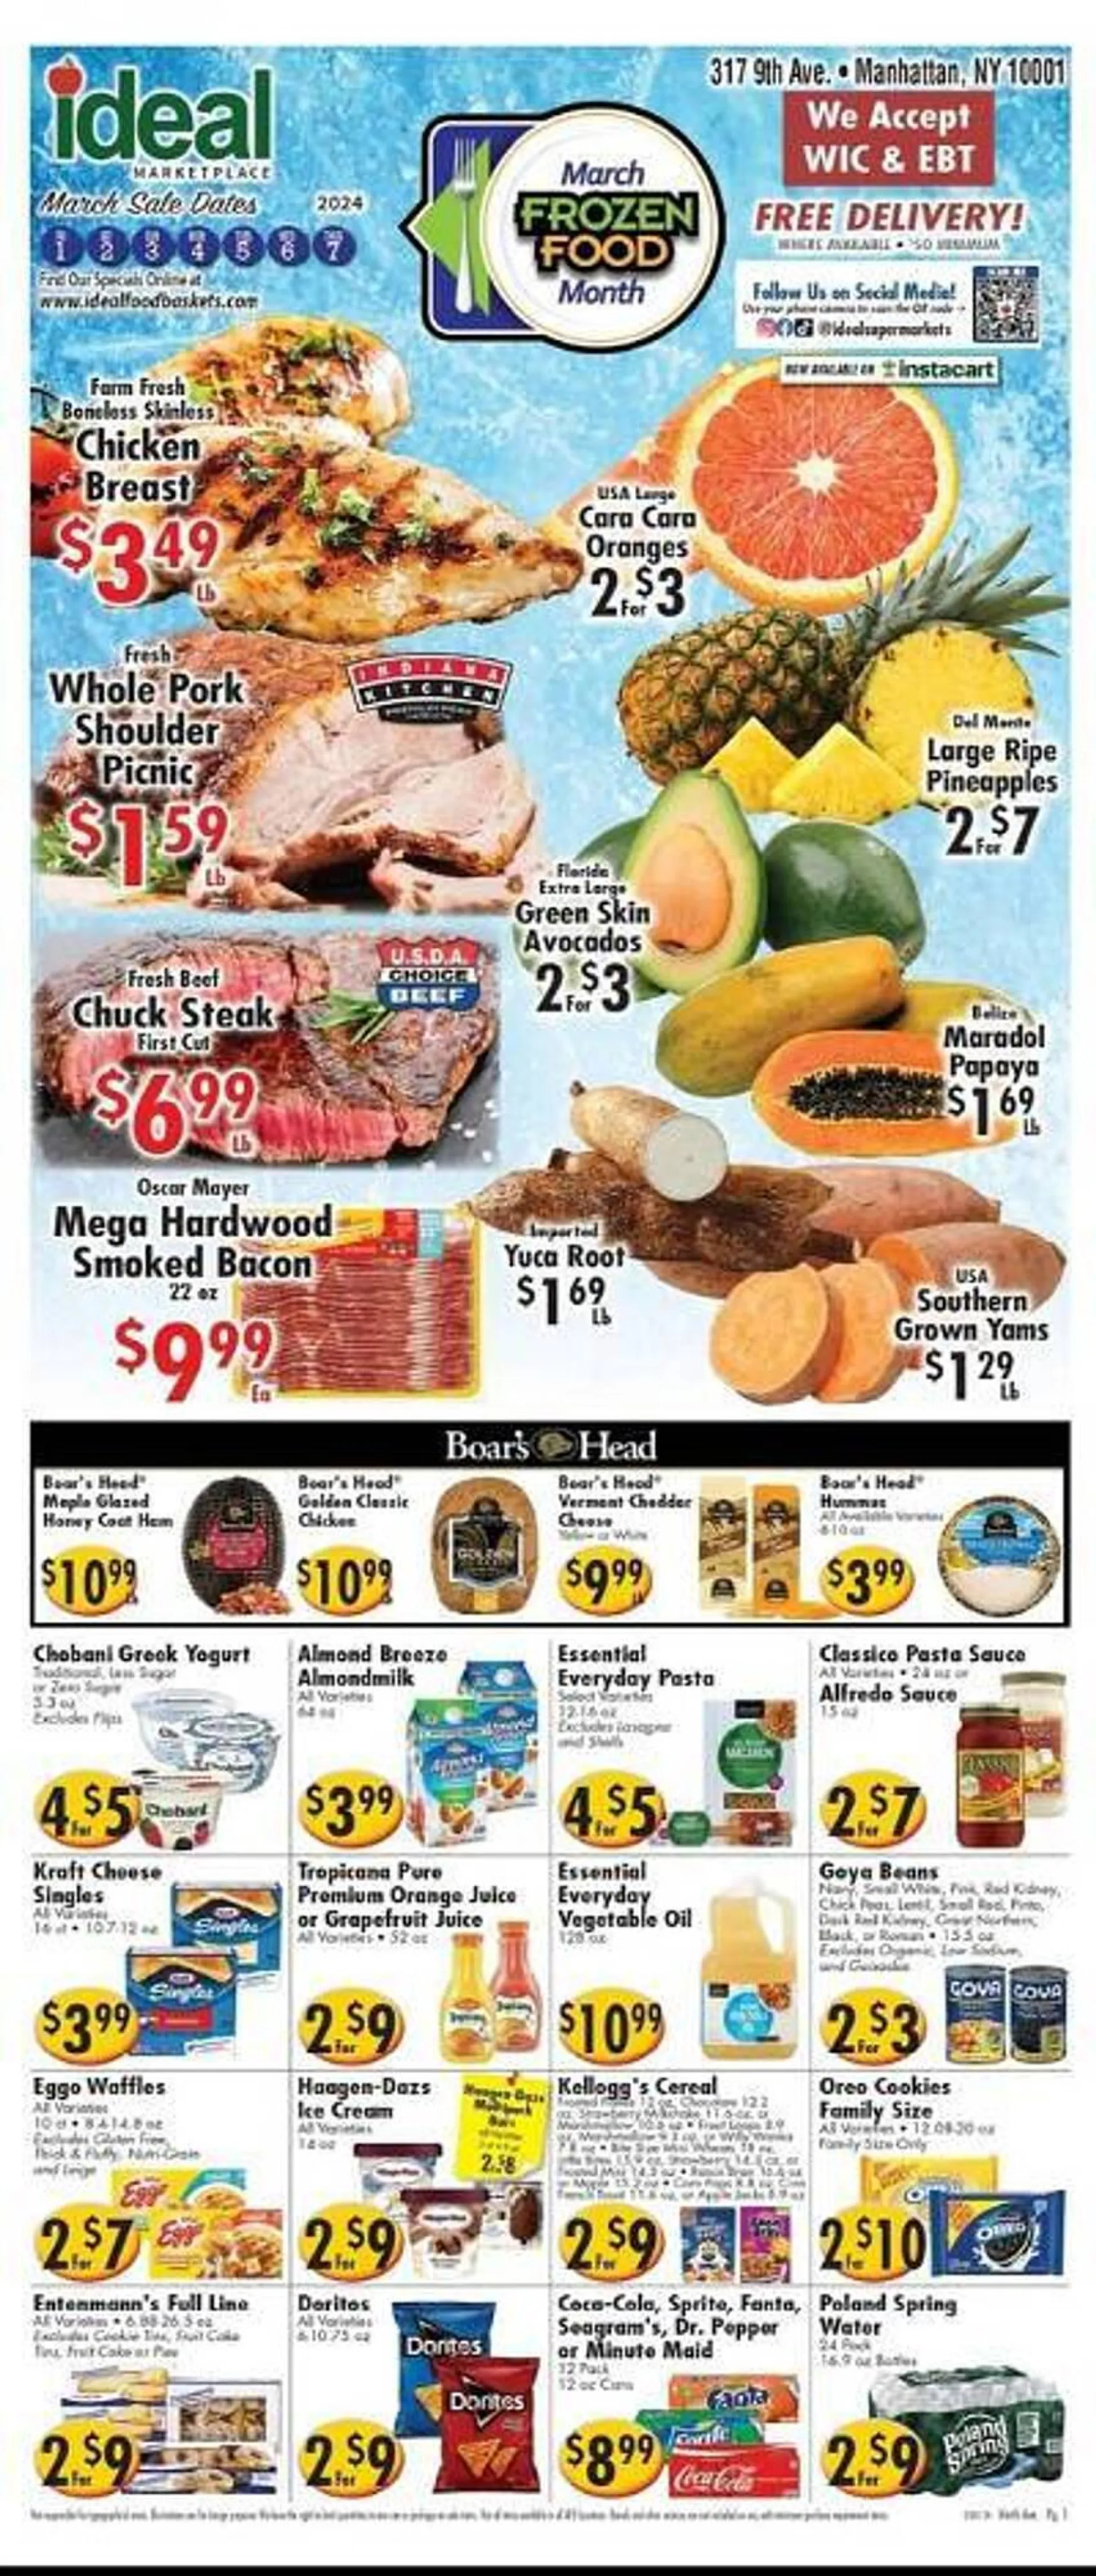 Weekly ad Ideal Food Basket Weekly Ad from March 1 to March 7 2024 - Page 1